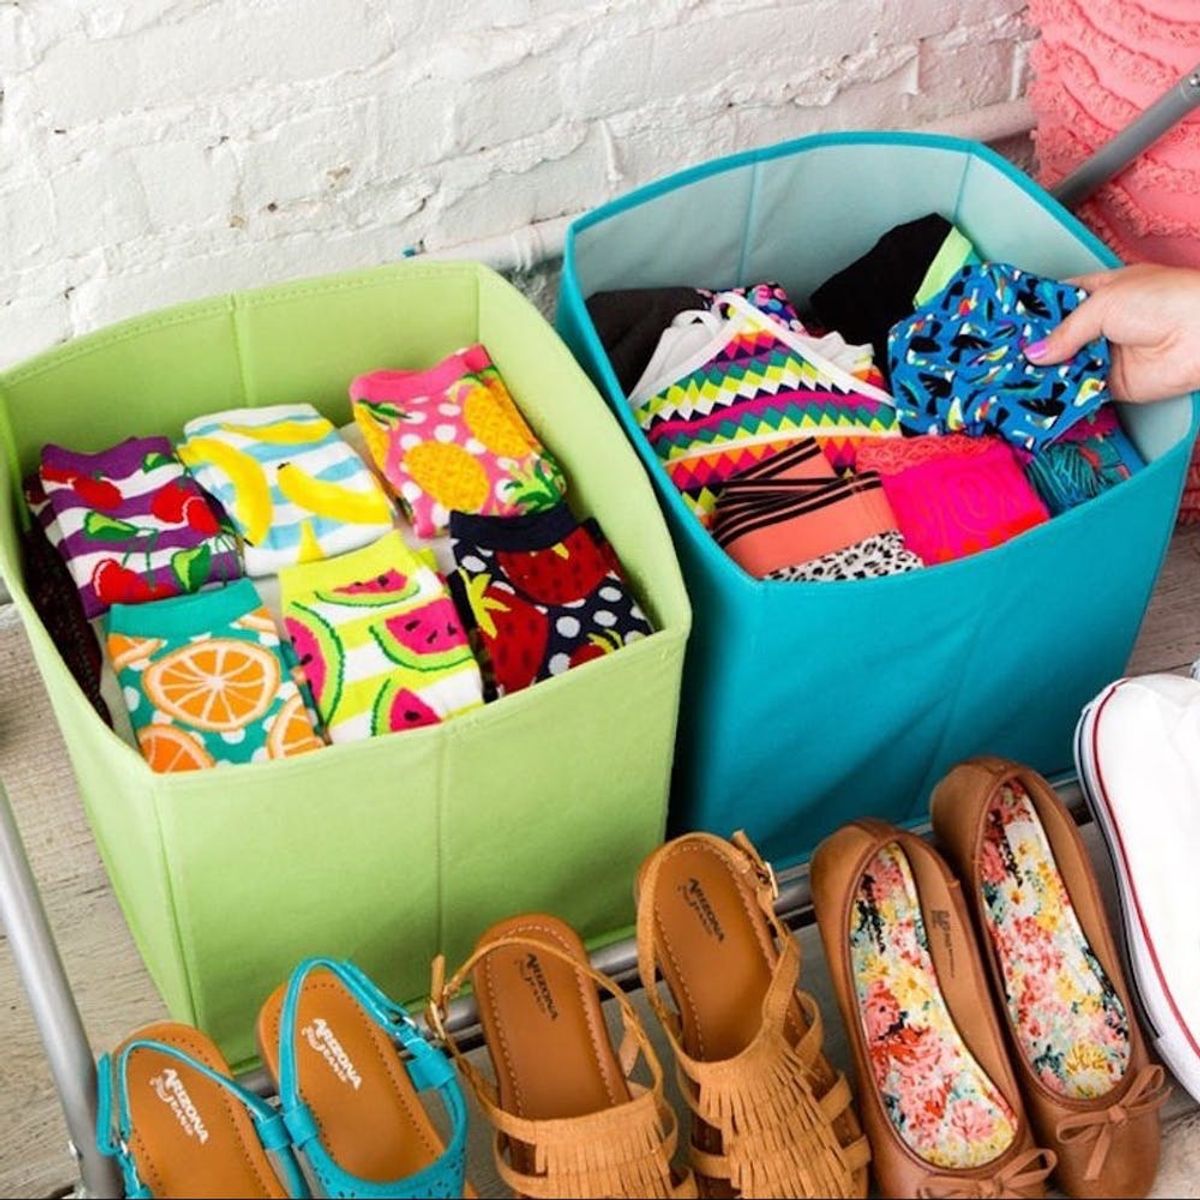 13 Closet Organization Ideas to Get You Ready for Summer